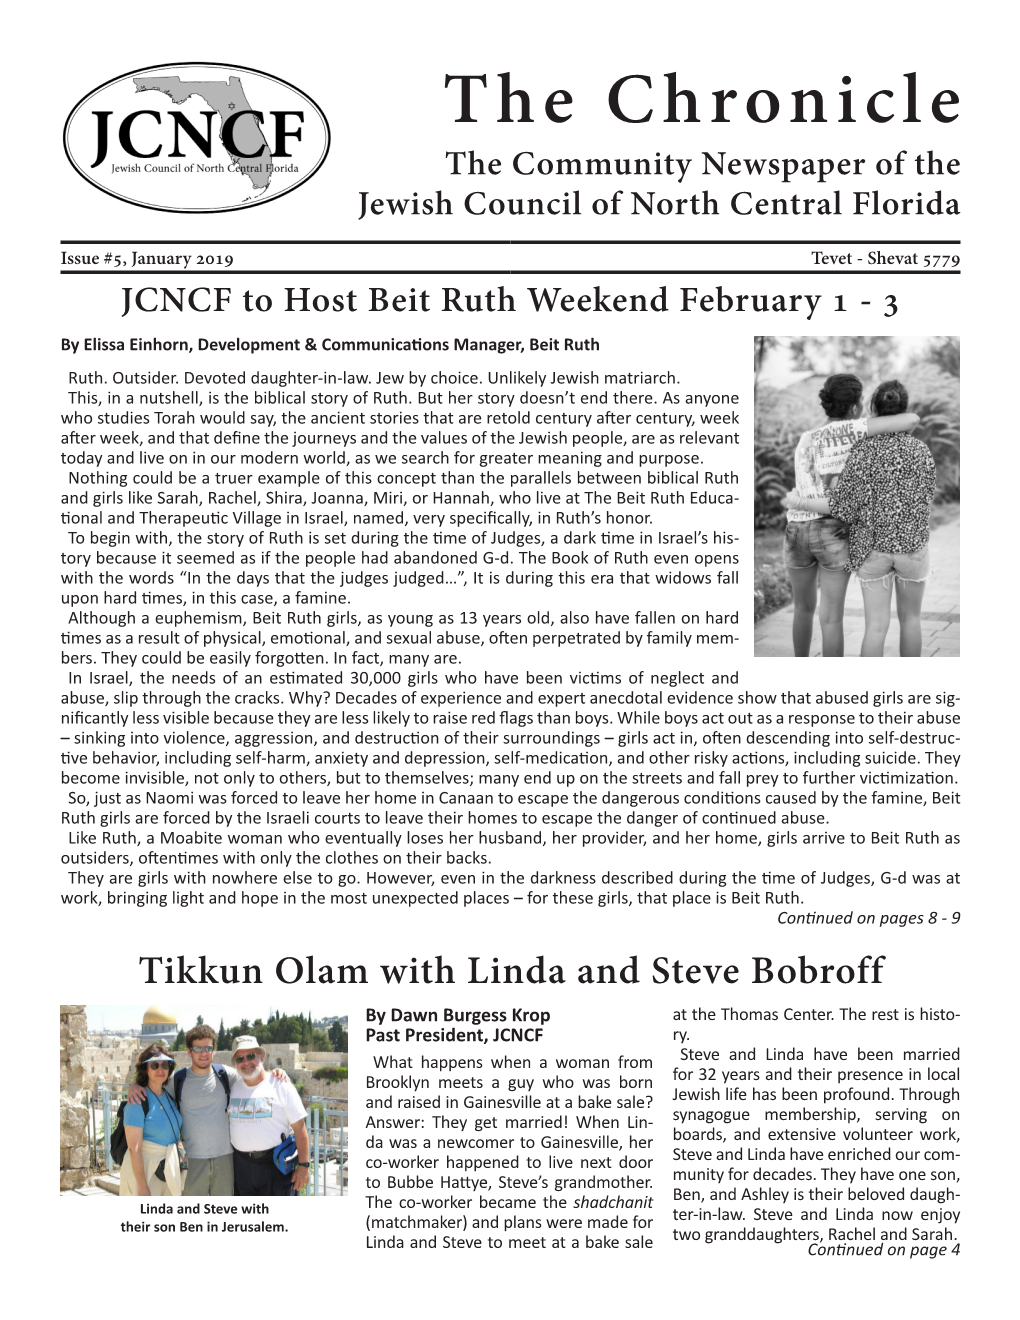 The Chronicle the Community Newspaper of the Jewish Council of North Central Florida